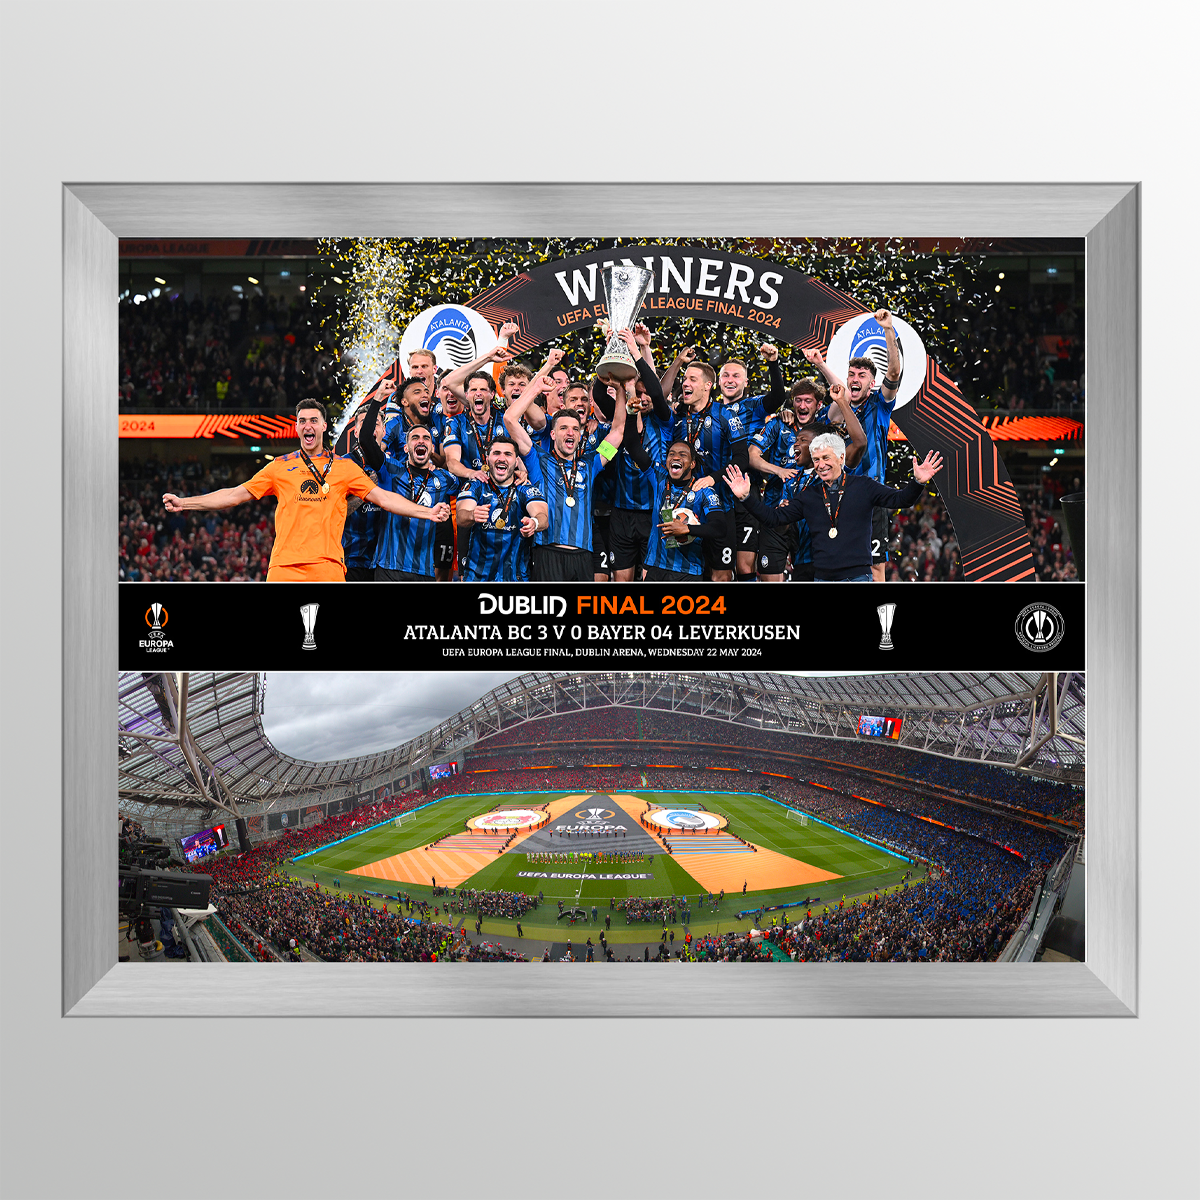 2024 UEFA Europa League Final Dublin Celebration Montage Featuring Trophy Lift and Panoramic Line Up